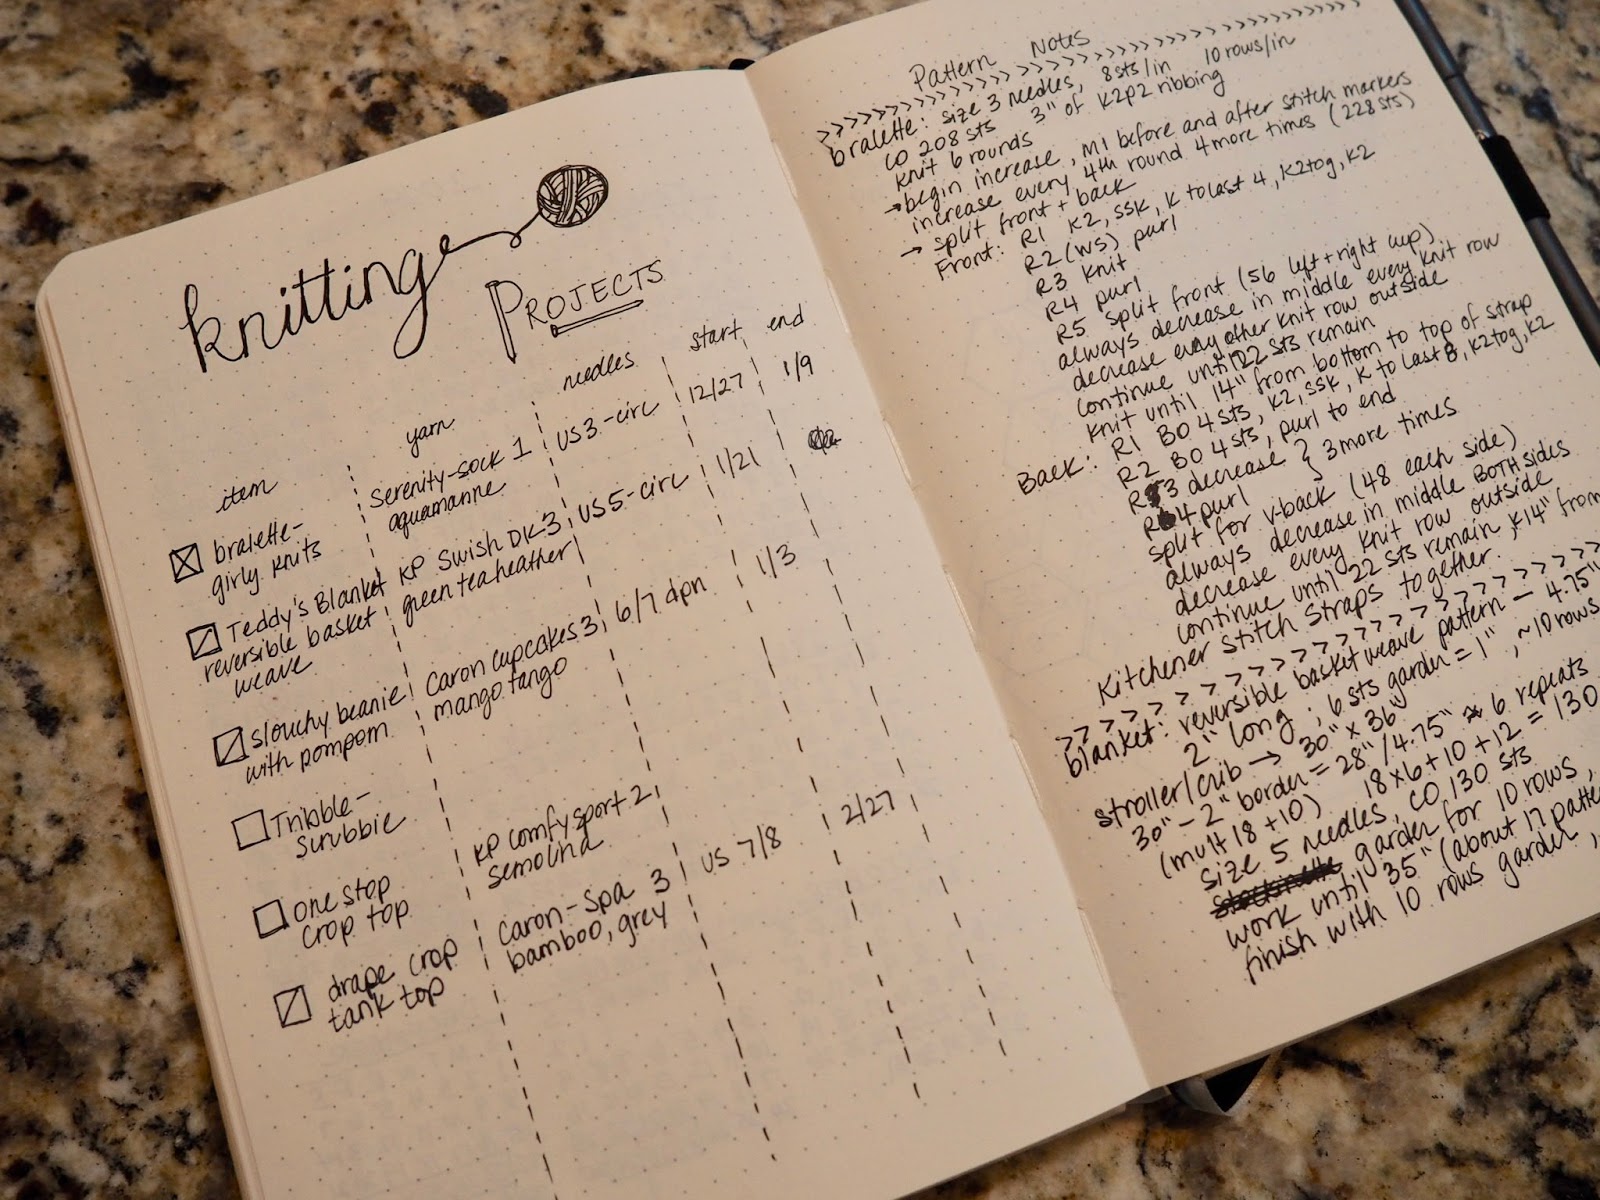 Staying organized with a knitting journal 